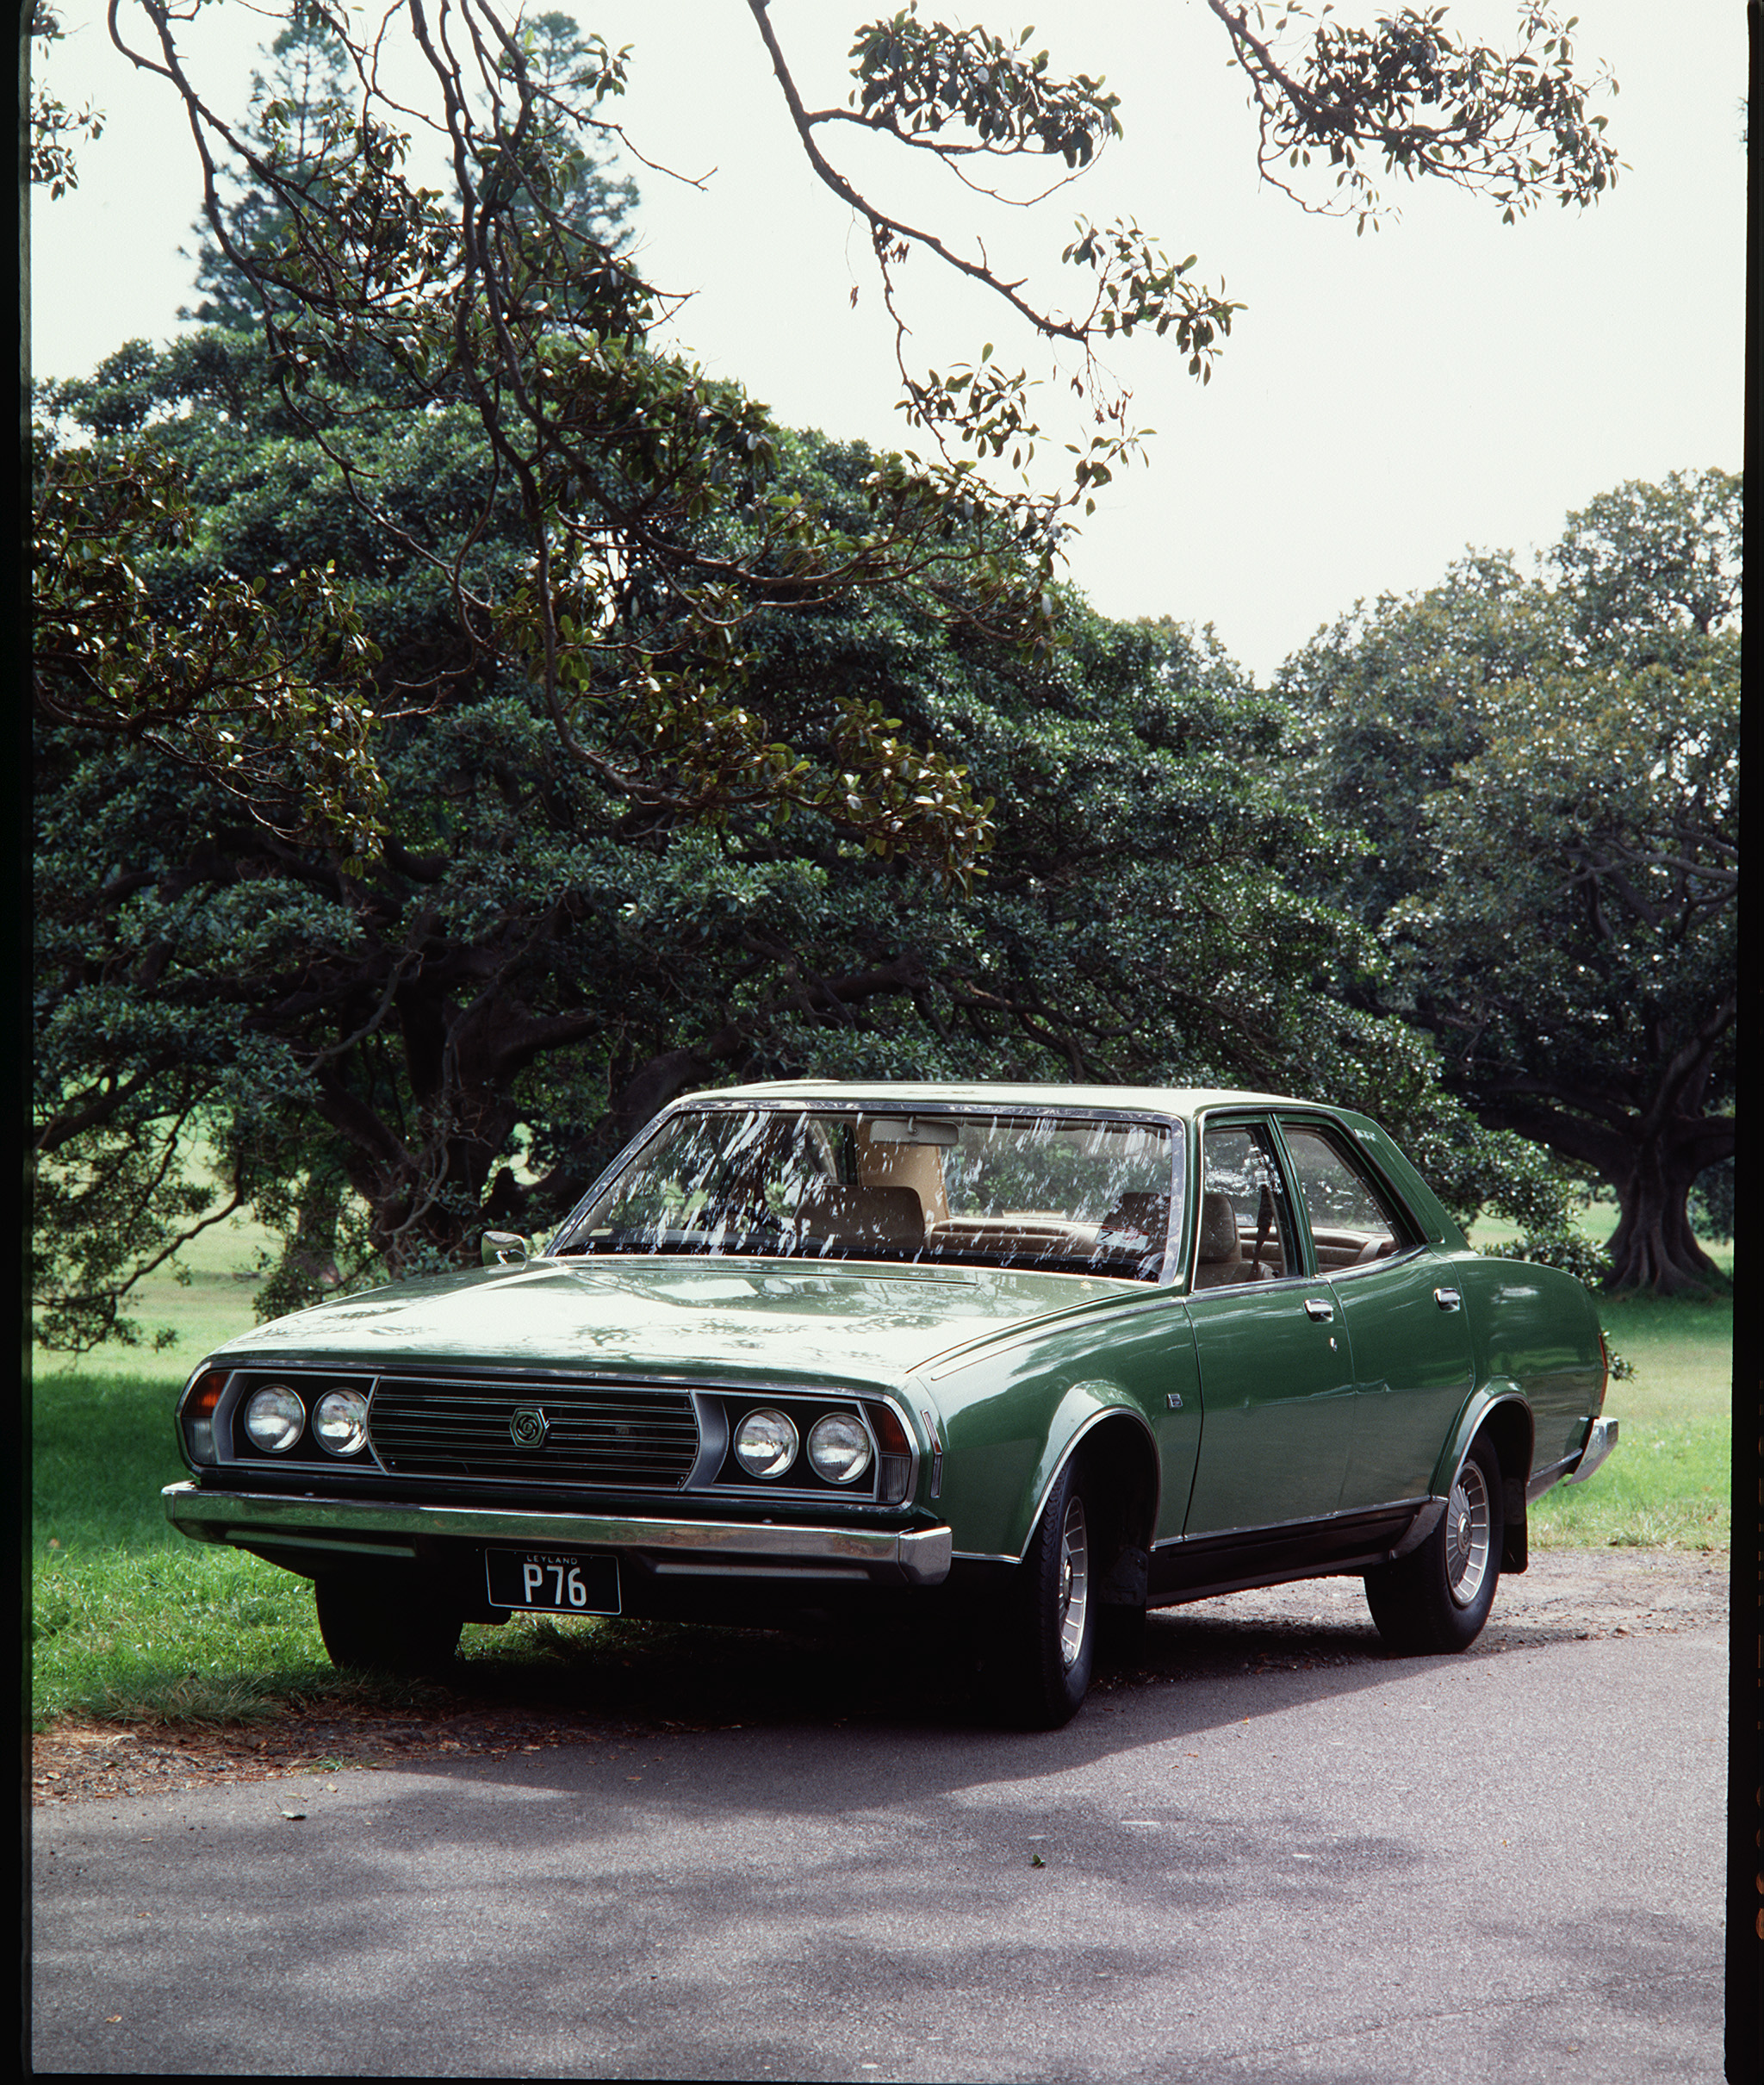 1974 Leyland P76 Super V-8 Saloon with manuals